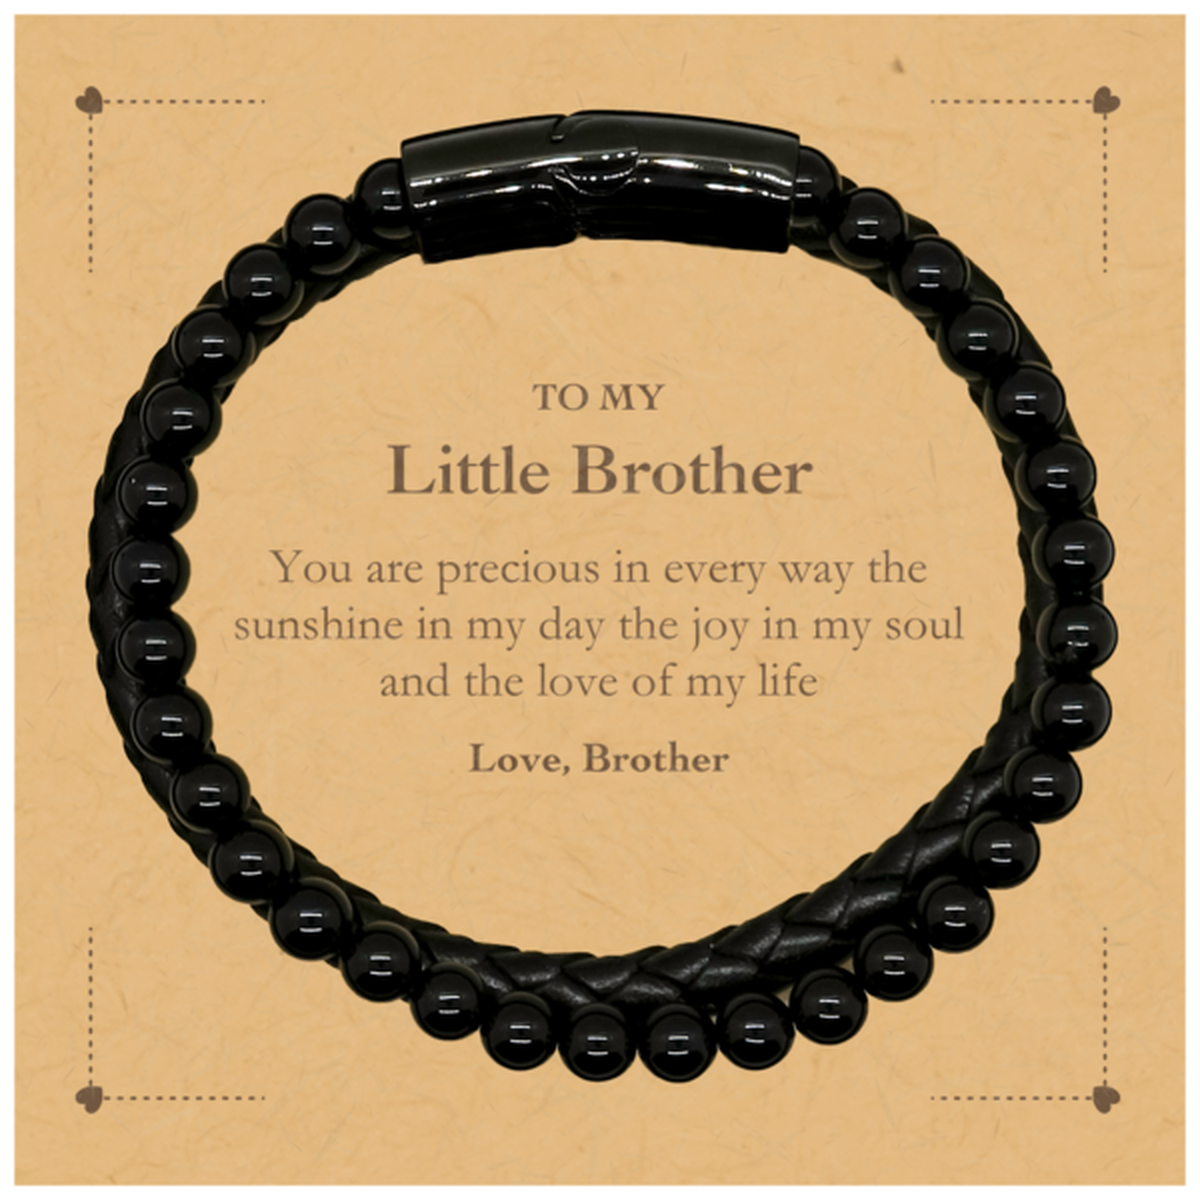 Graduation Gifts for Little Brother Stone Leather Bracelets Present from Brother, Christmas Little Brother Birthday Gifts Little Brother You are precious in every way the sunshine in my day. Love, Brother